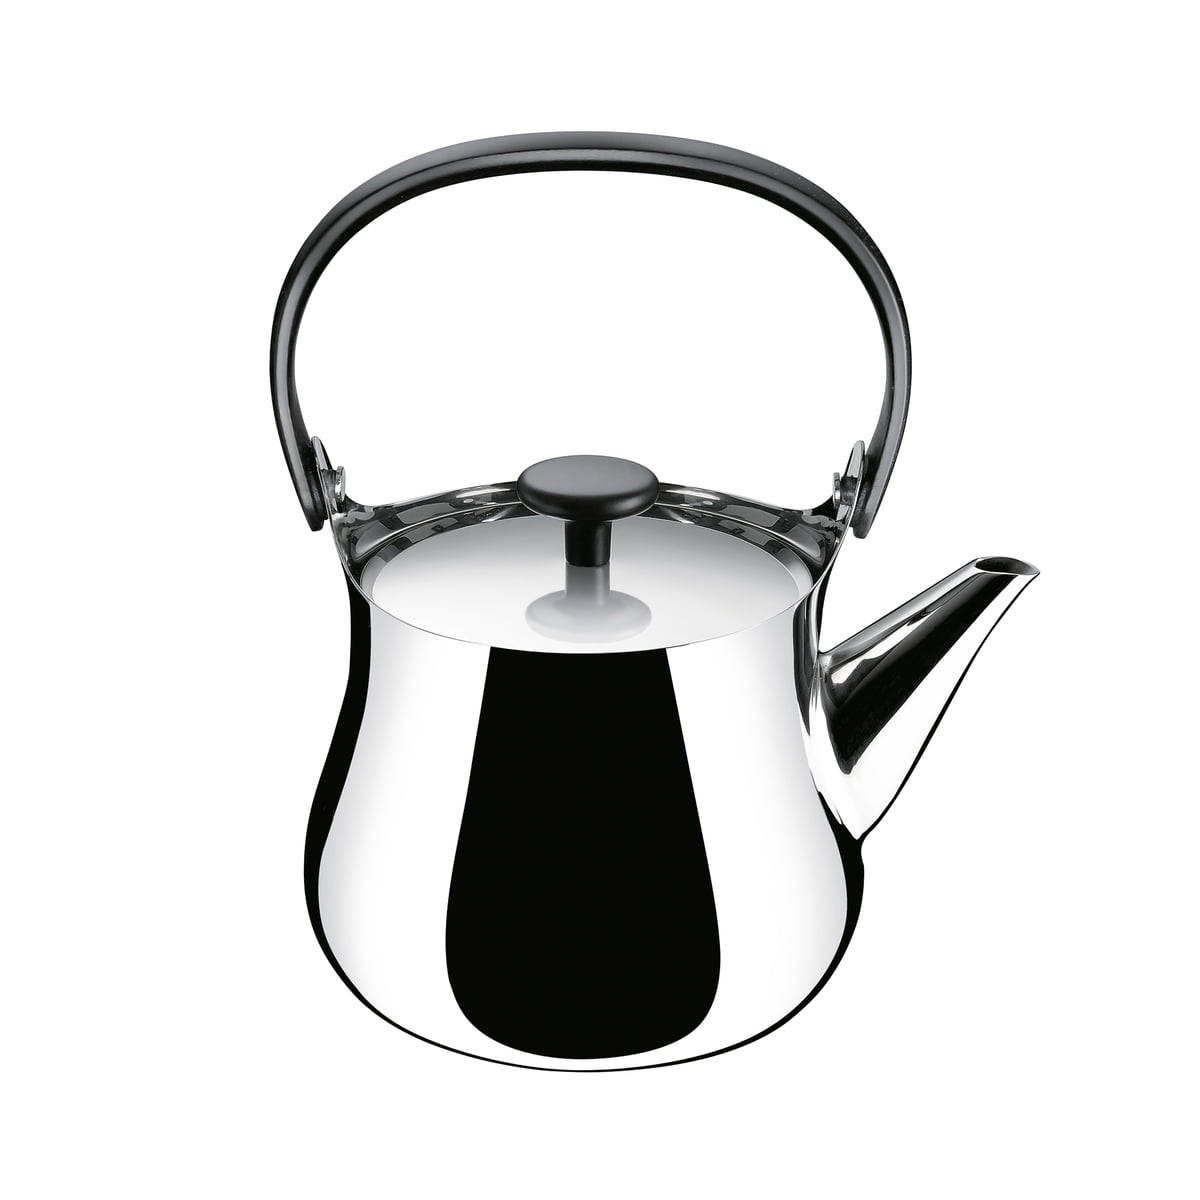 14 Modern Teapots and Kettle Designs